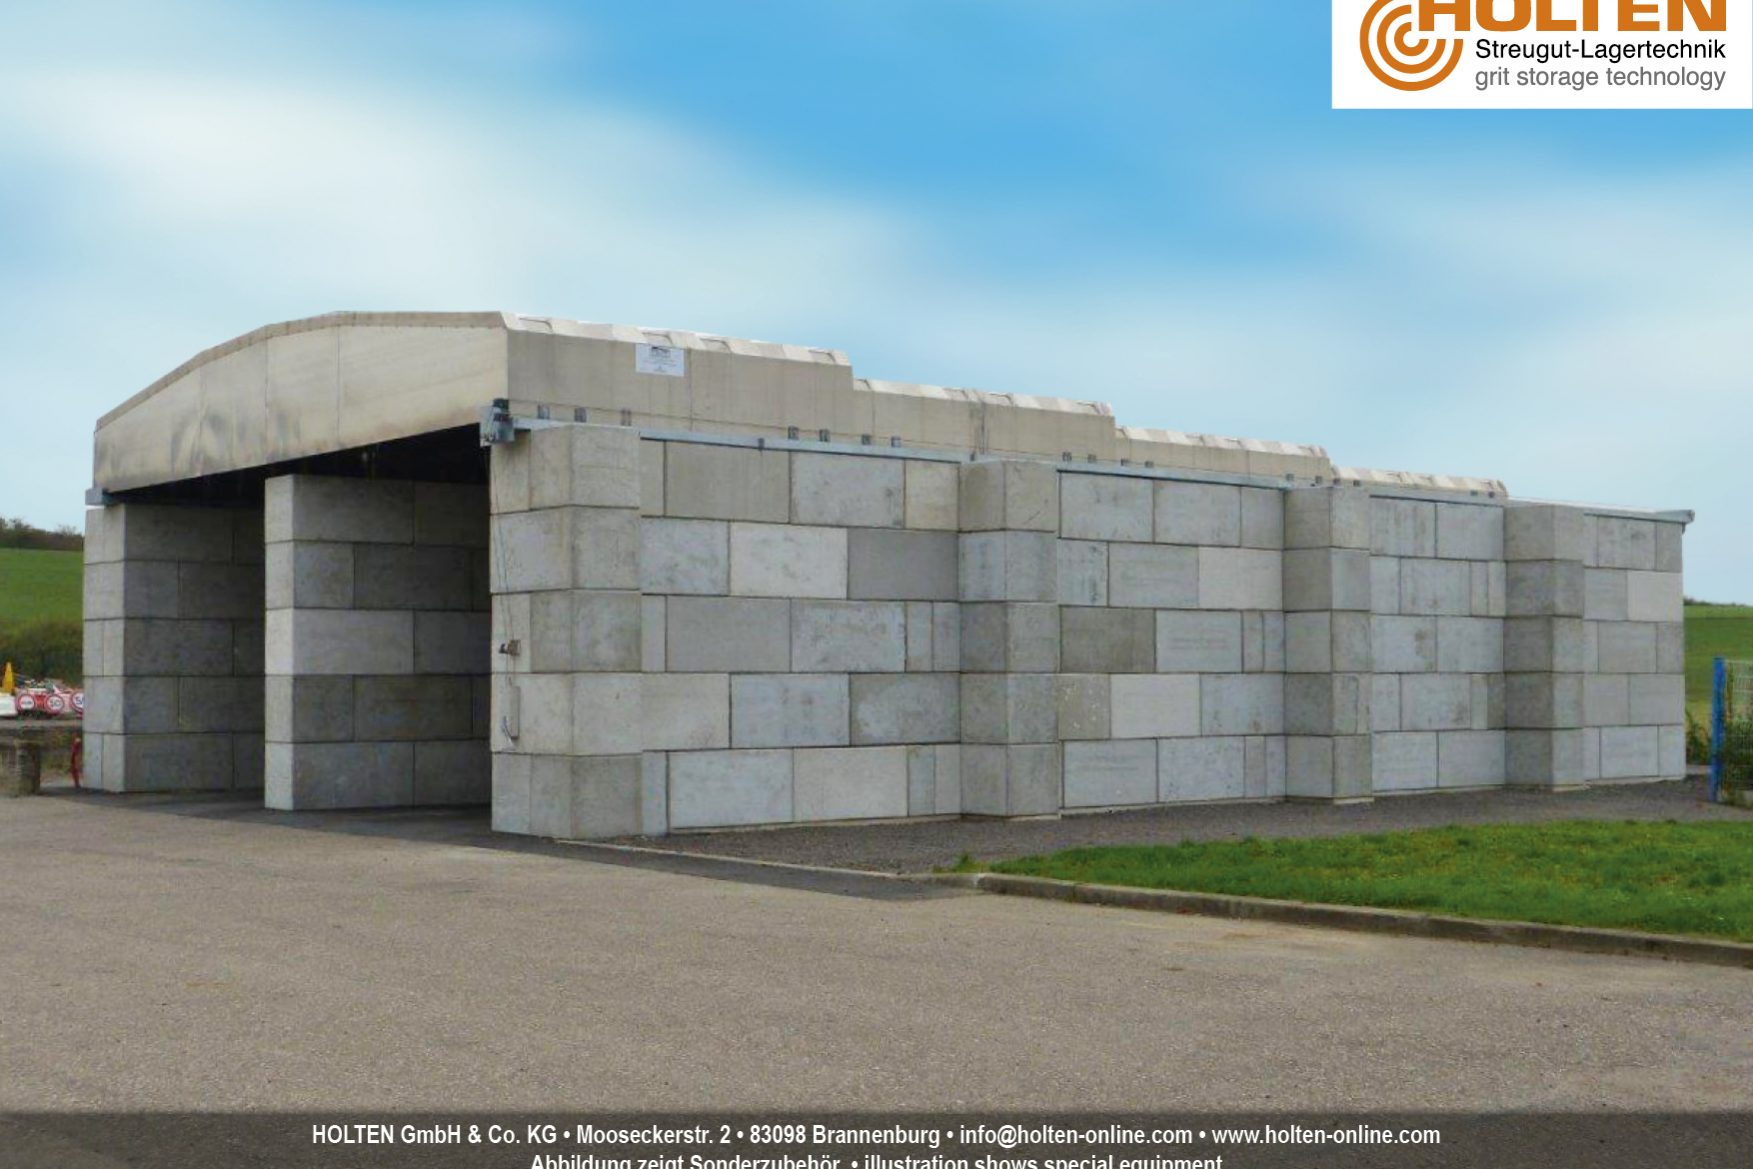 HOLTEN picuture concrete blocks with sliding roof 4 of 4